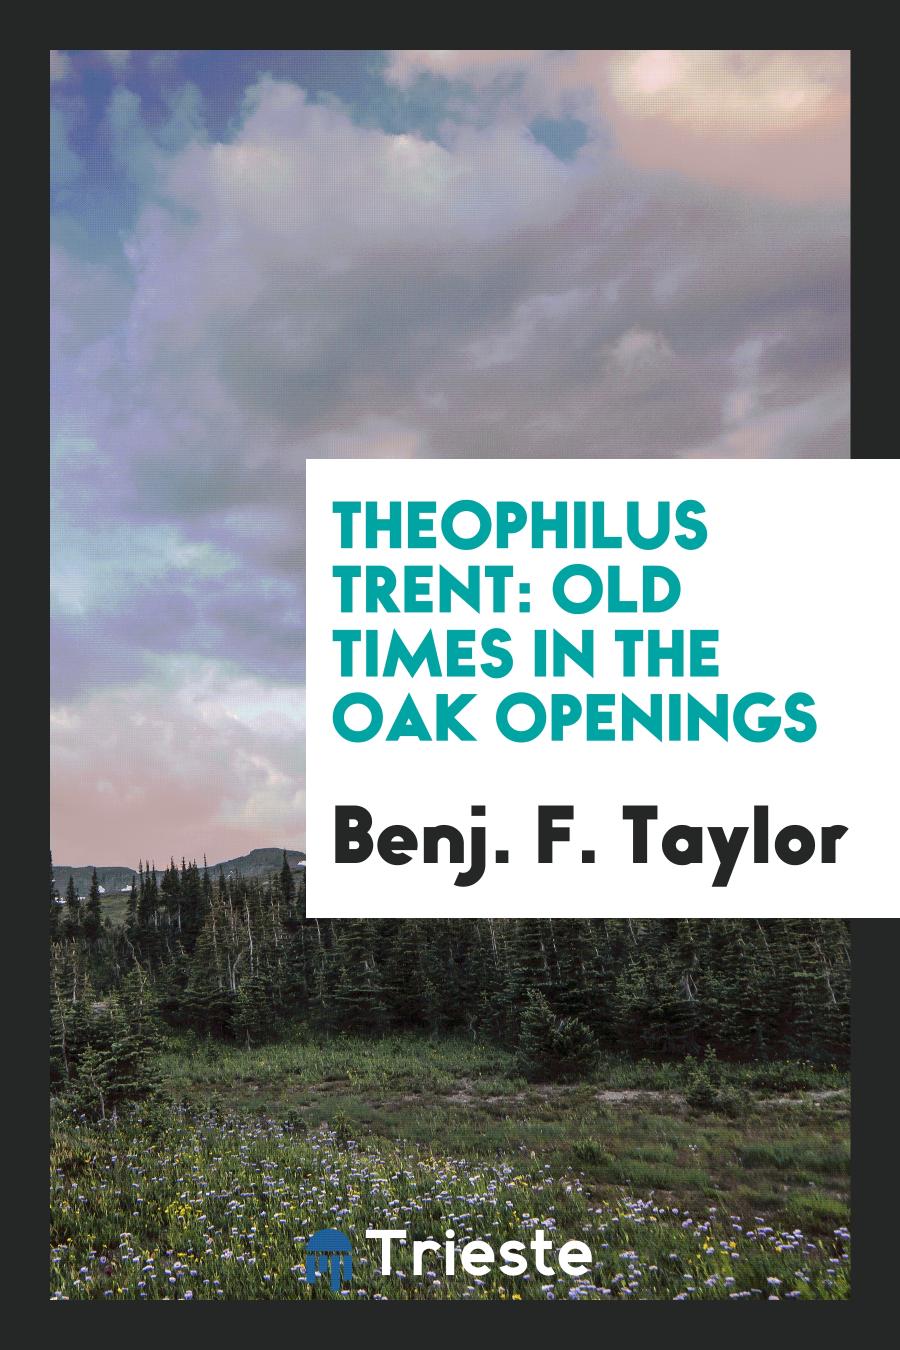 Theophilus Trent: Old Times in the Oak Openings